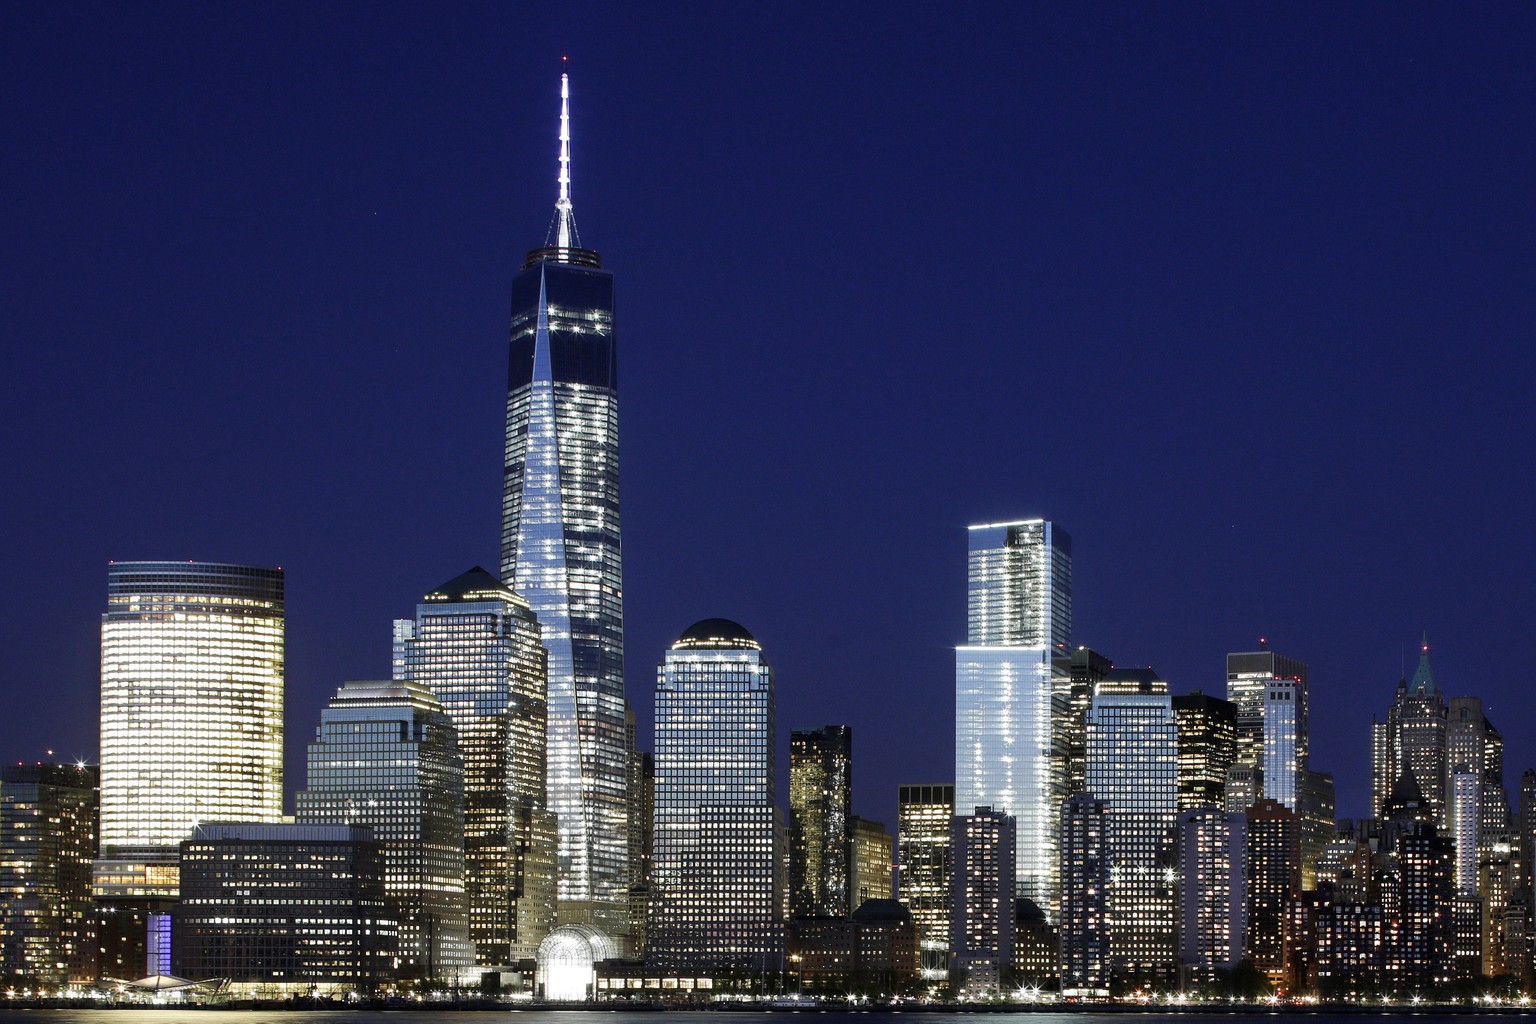 FILE - In this Tuesday, May 6, 2014 file photo, a mostly illuminated One World Trade Center towers over the lower Manhattan skyline in New York. The neon lights of Broadway might not all shine so brig ...